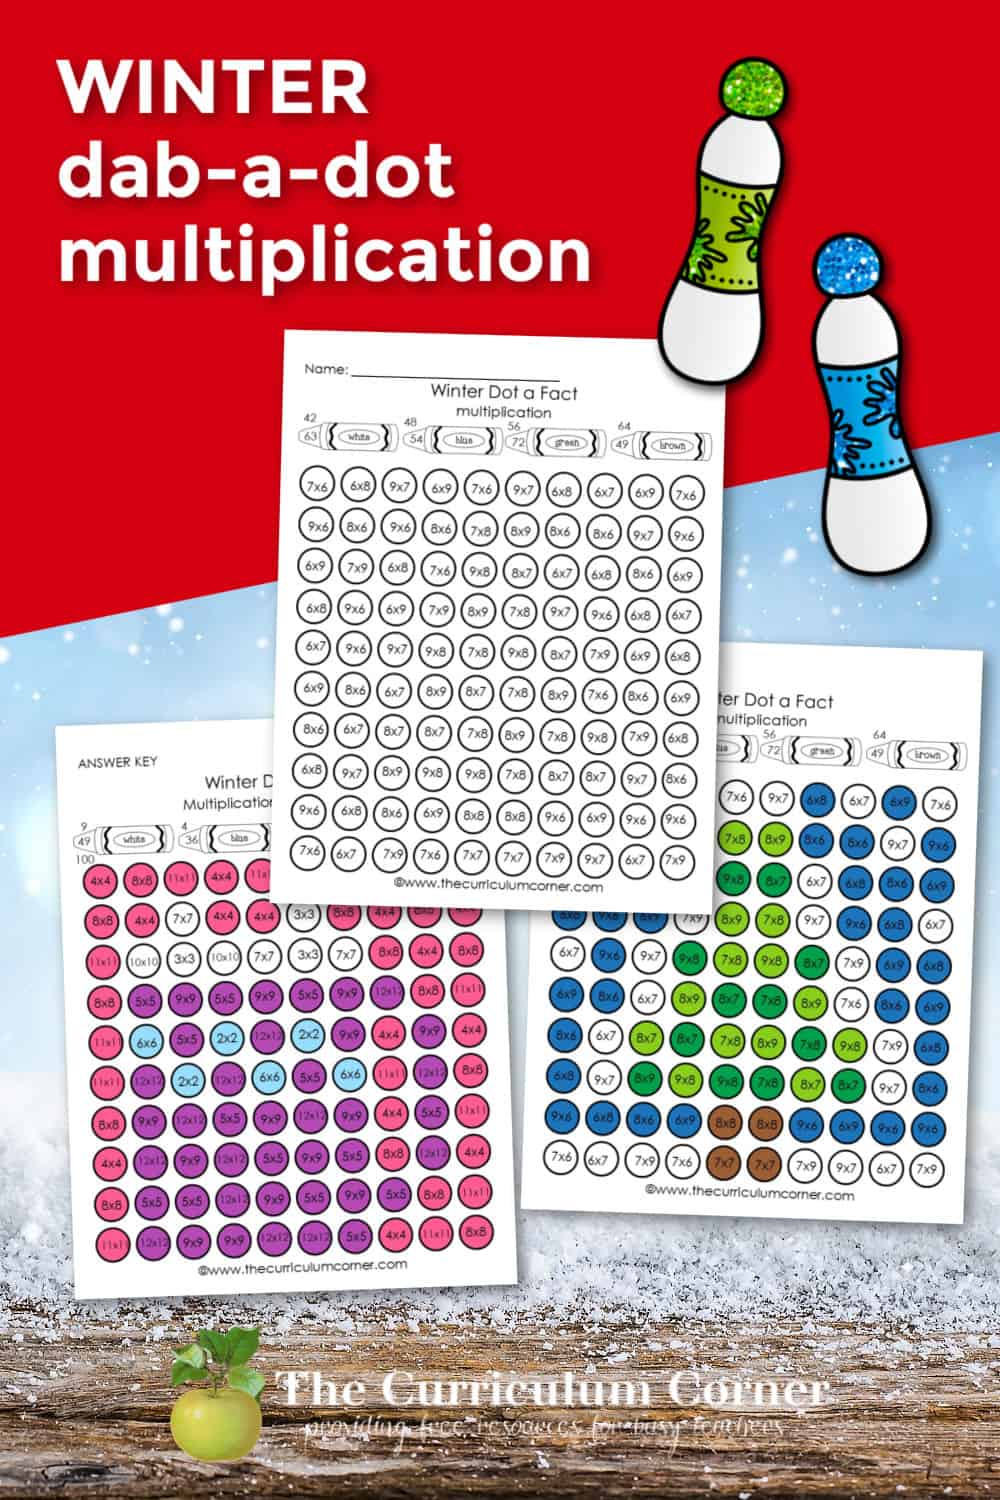 winter-dab-a-dot-multiplication-facts-the-curriculum-corner-123